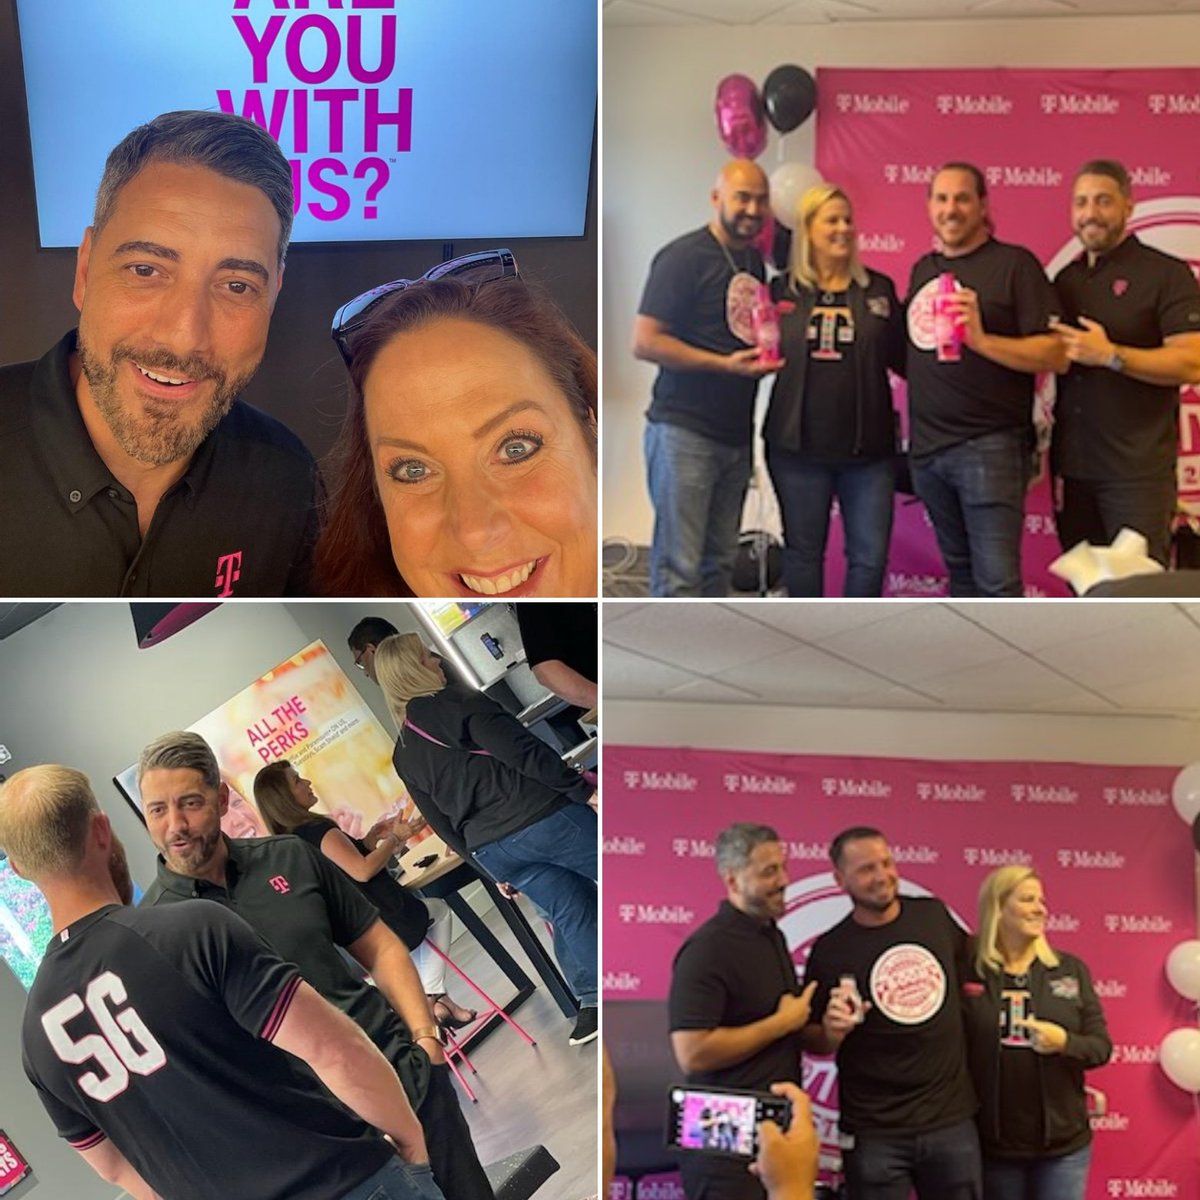 Incredible town hall in the Carolinas last week! Thank you all for coming down, asking questions, giving feedback, and as always, bringing the #BoomSauce 💥💥💪